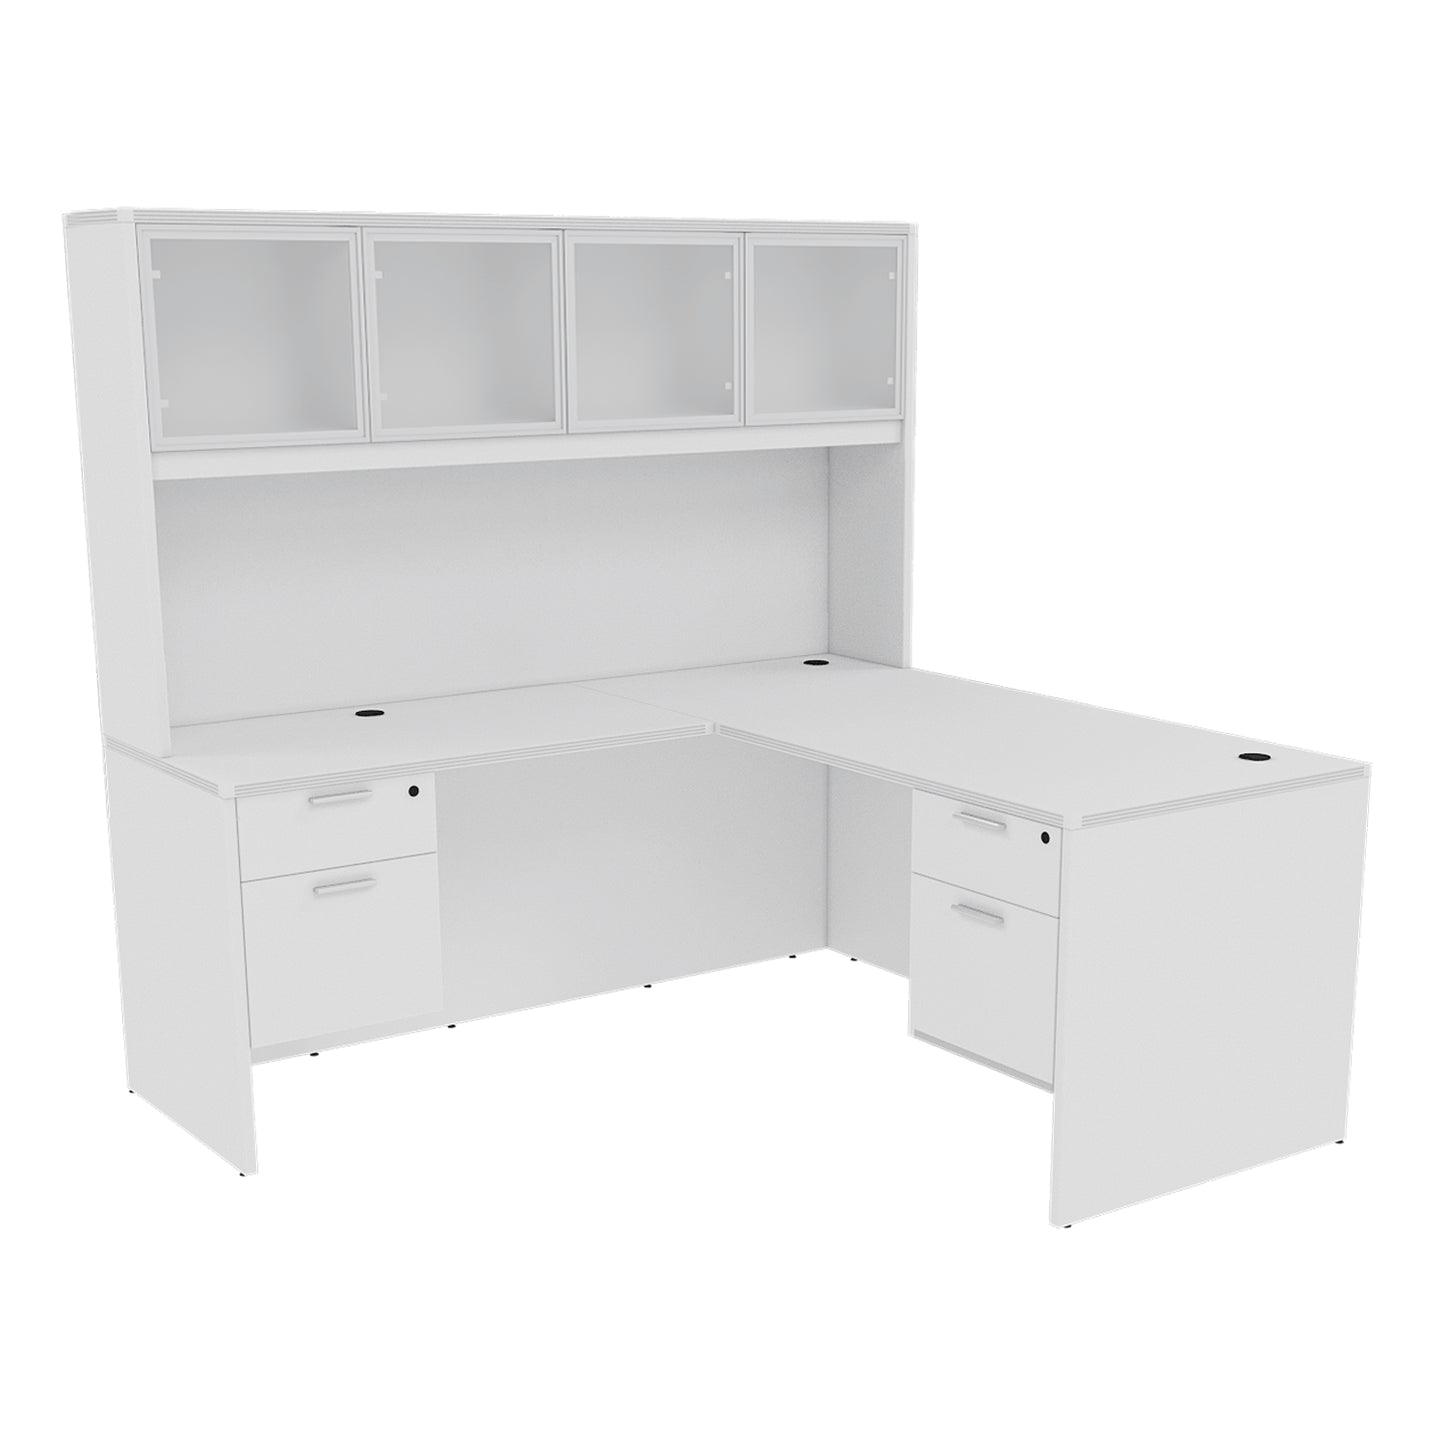 Kai L-Shaped Desk with Double Suspended Pedestals & 4 Door Hutch